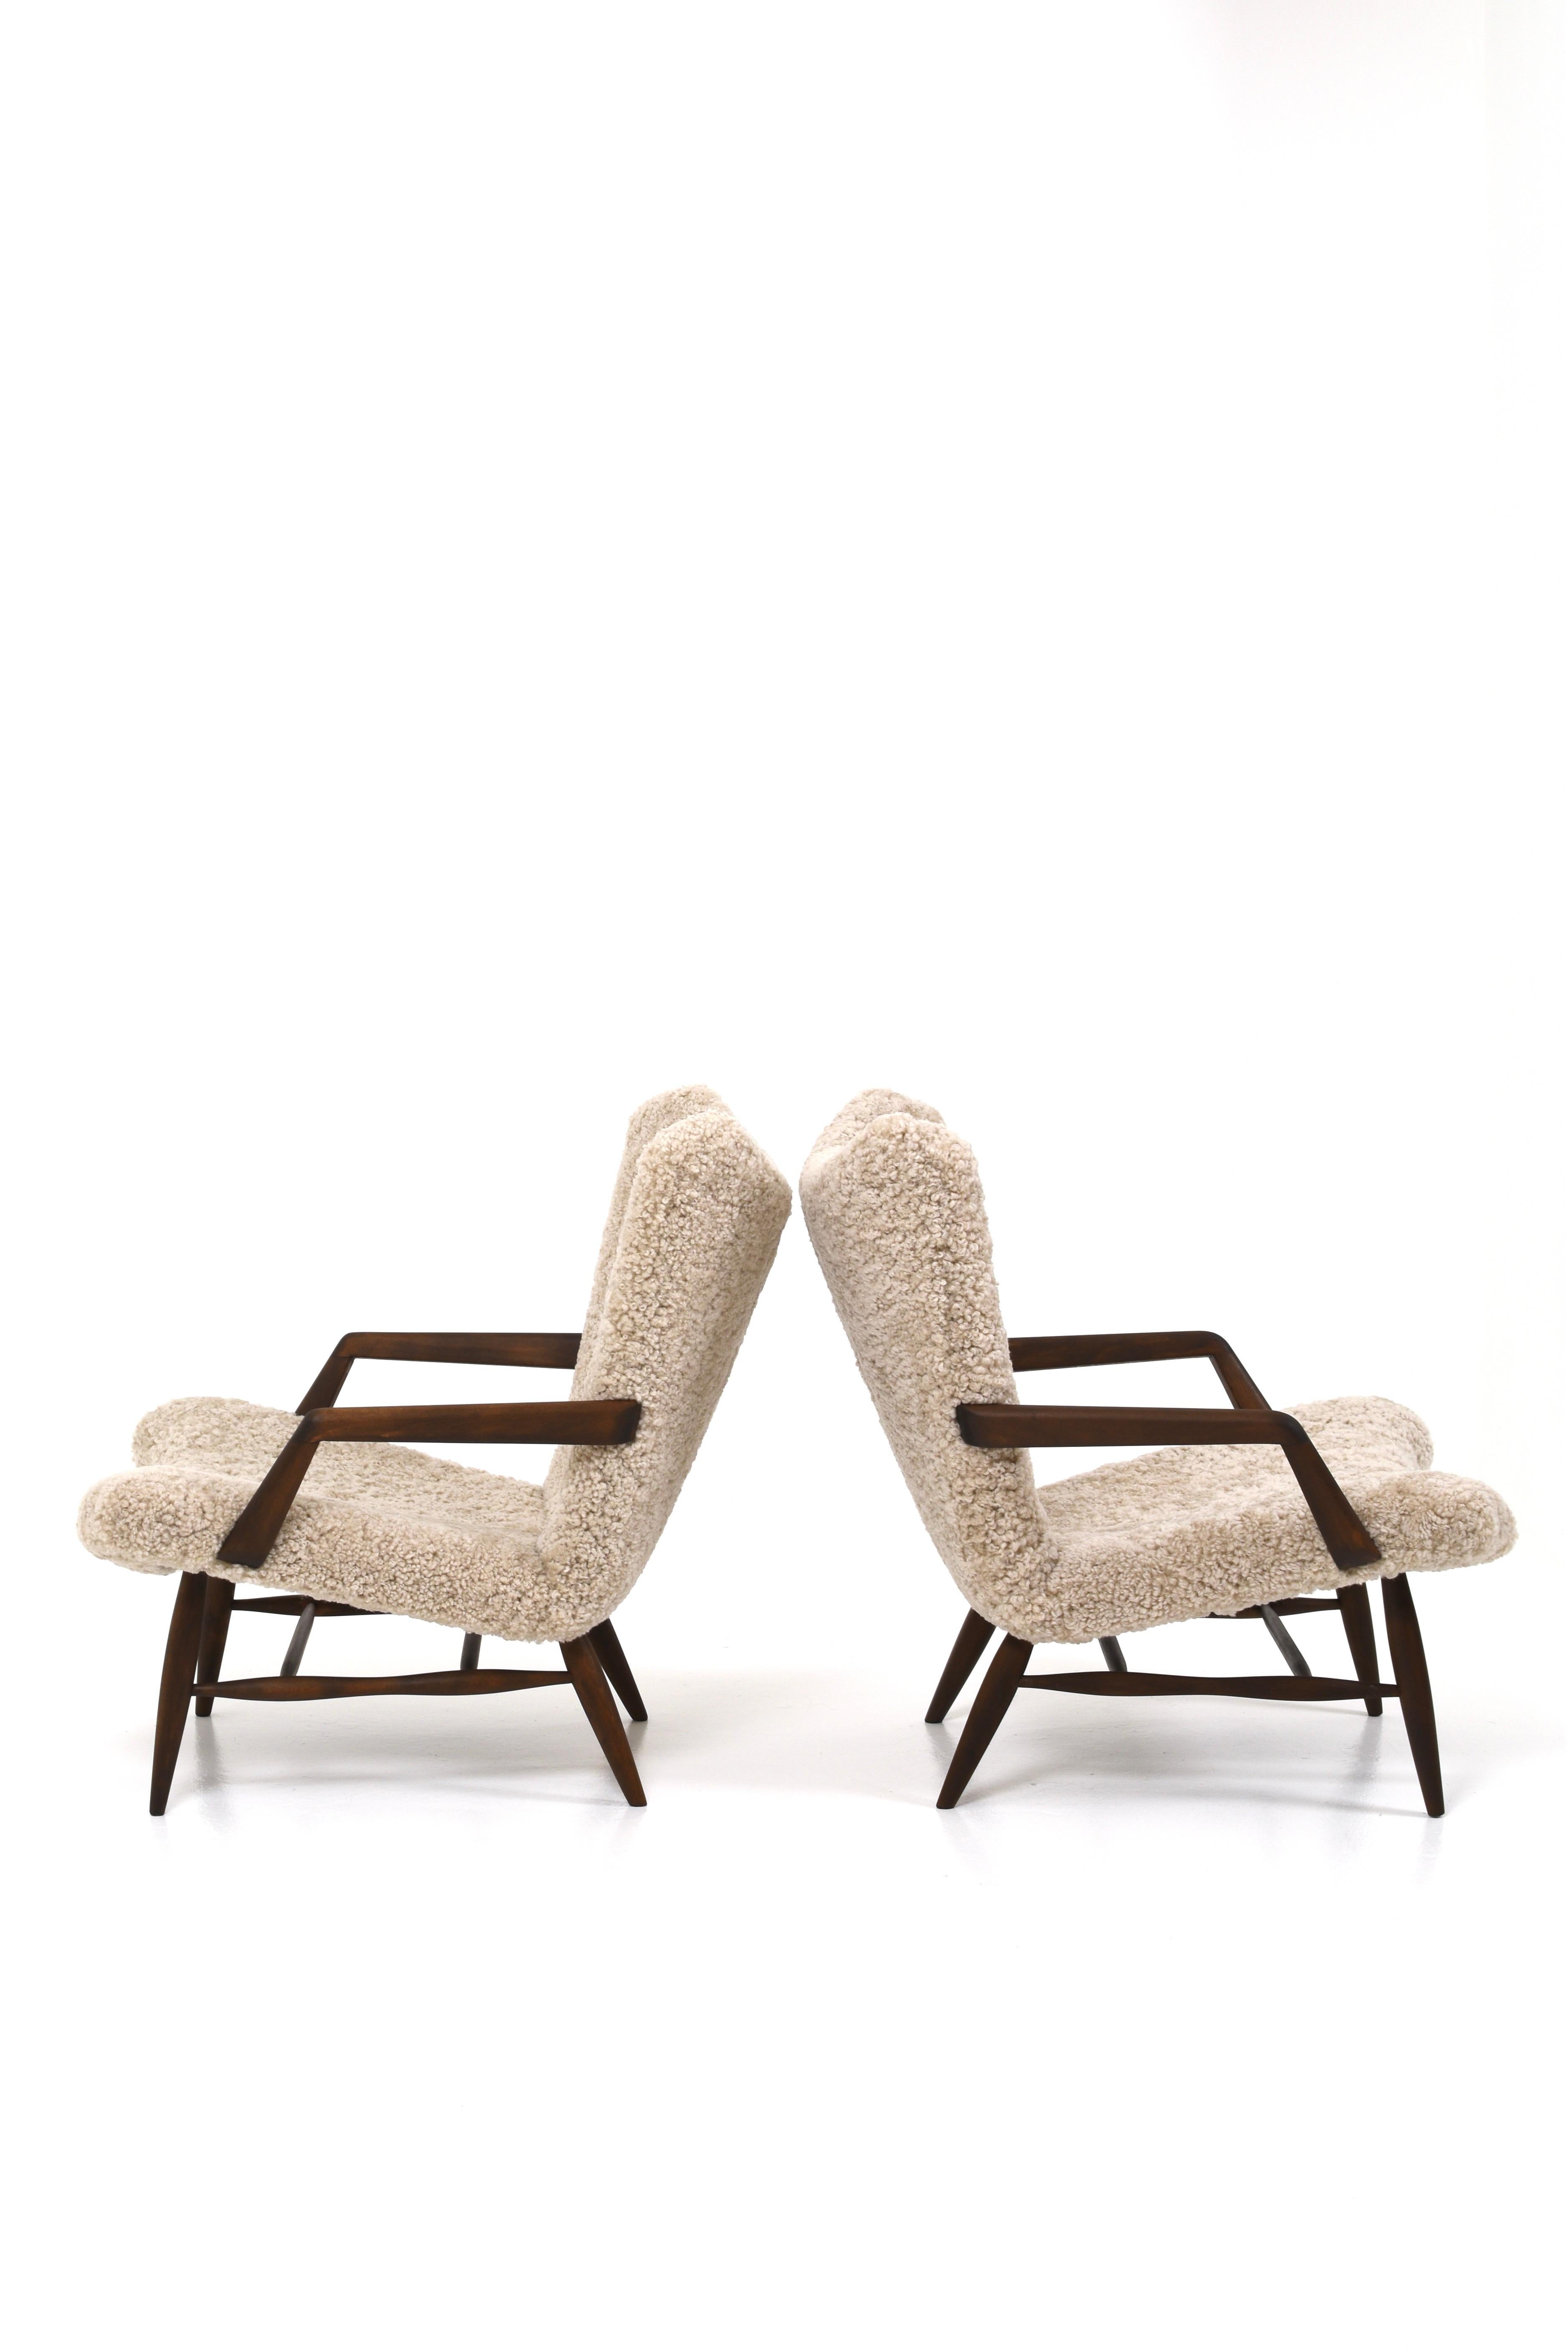 An unusual armchair model designed by Svante Skogh.
The frame of the armchair is sanded, stained and oiled. It has a matte finish. 
Both armchairs are upholstered in beige sheepskin.

The armchairs are very comfortable to sit in and very beautiful.